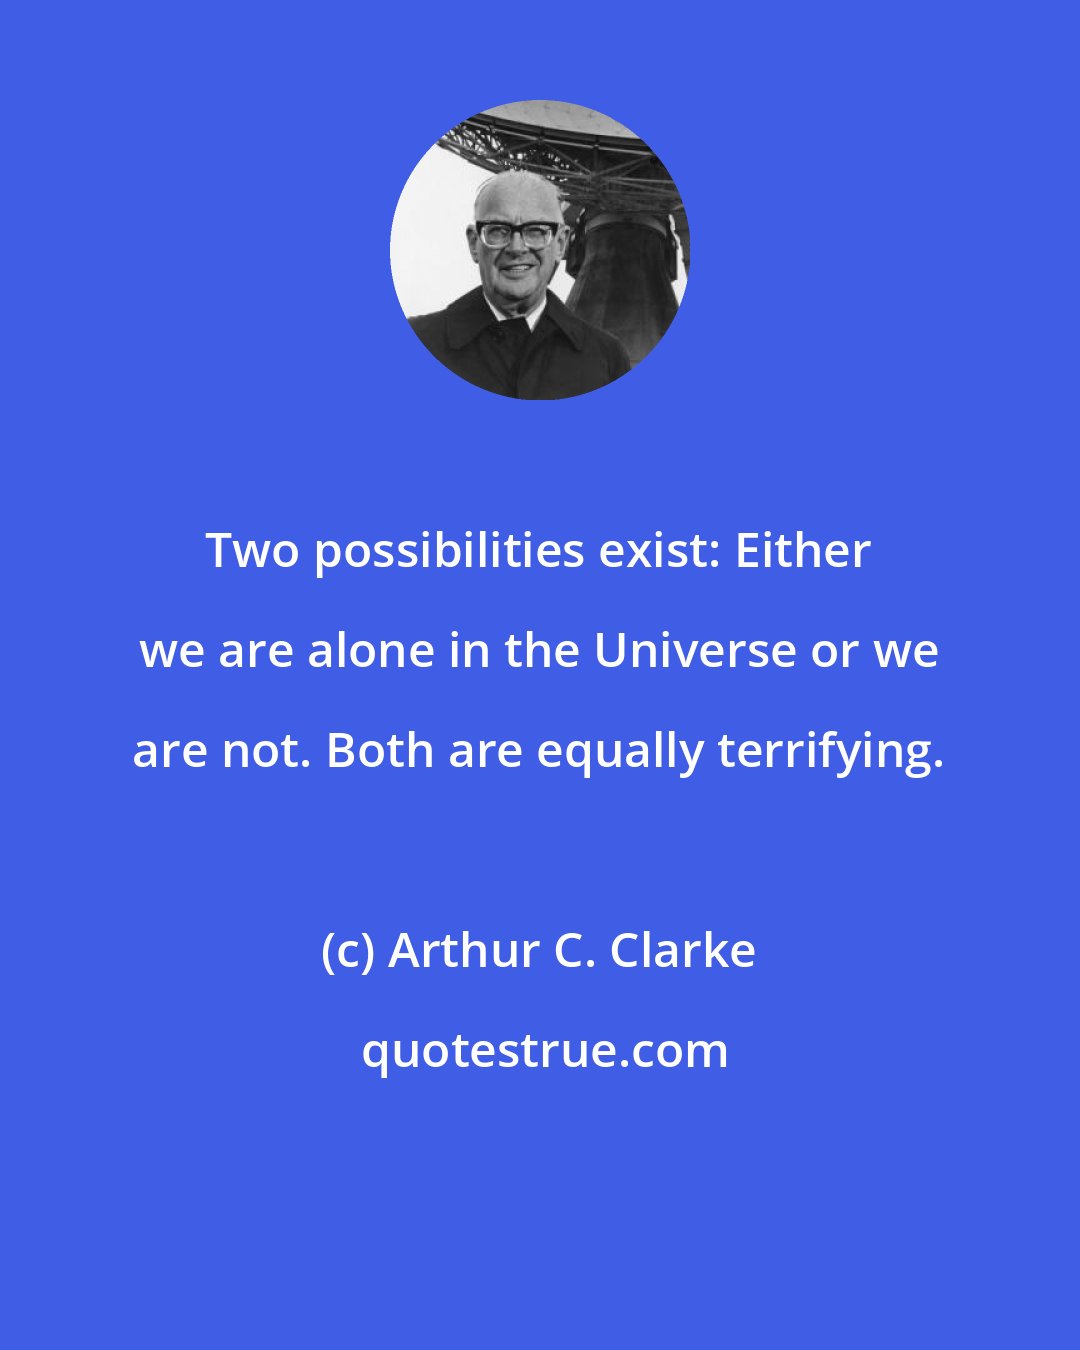 Arthur C. Clarke: Two possibilities exist: Either we are alone in the Universe or we are not. Both are equally terrifying.